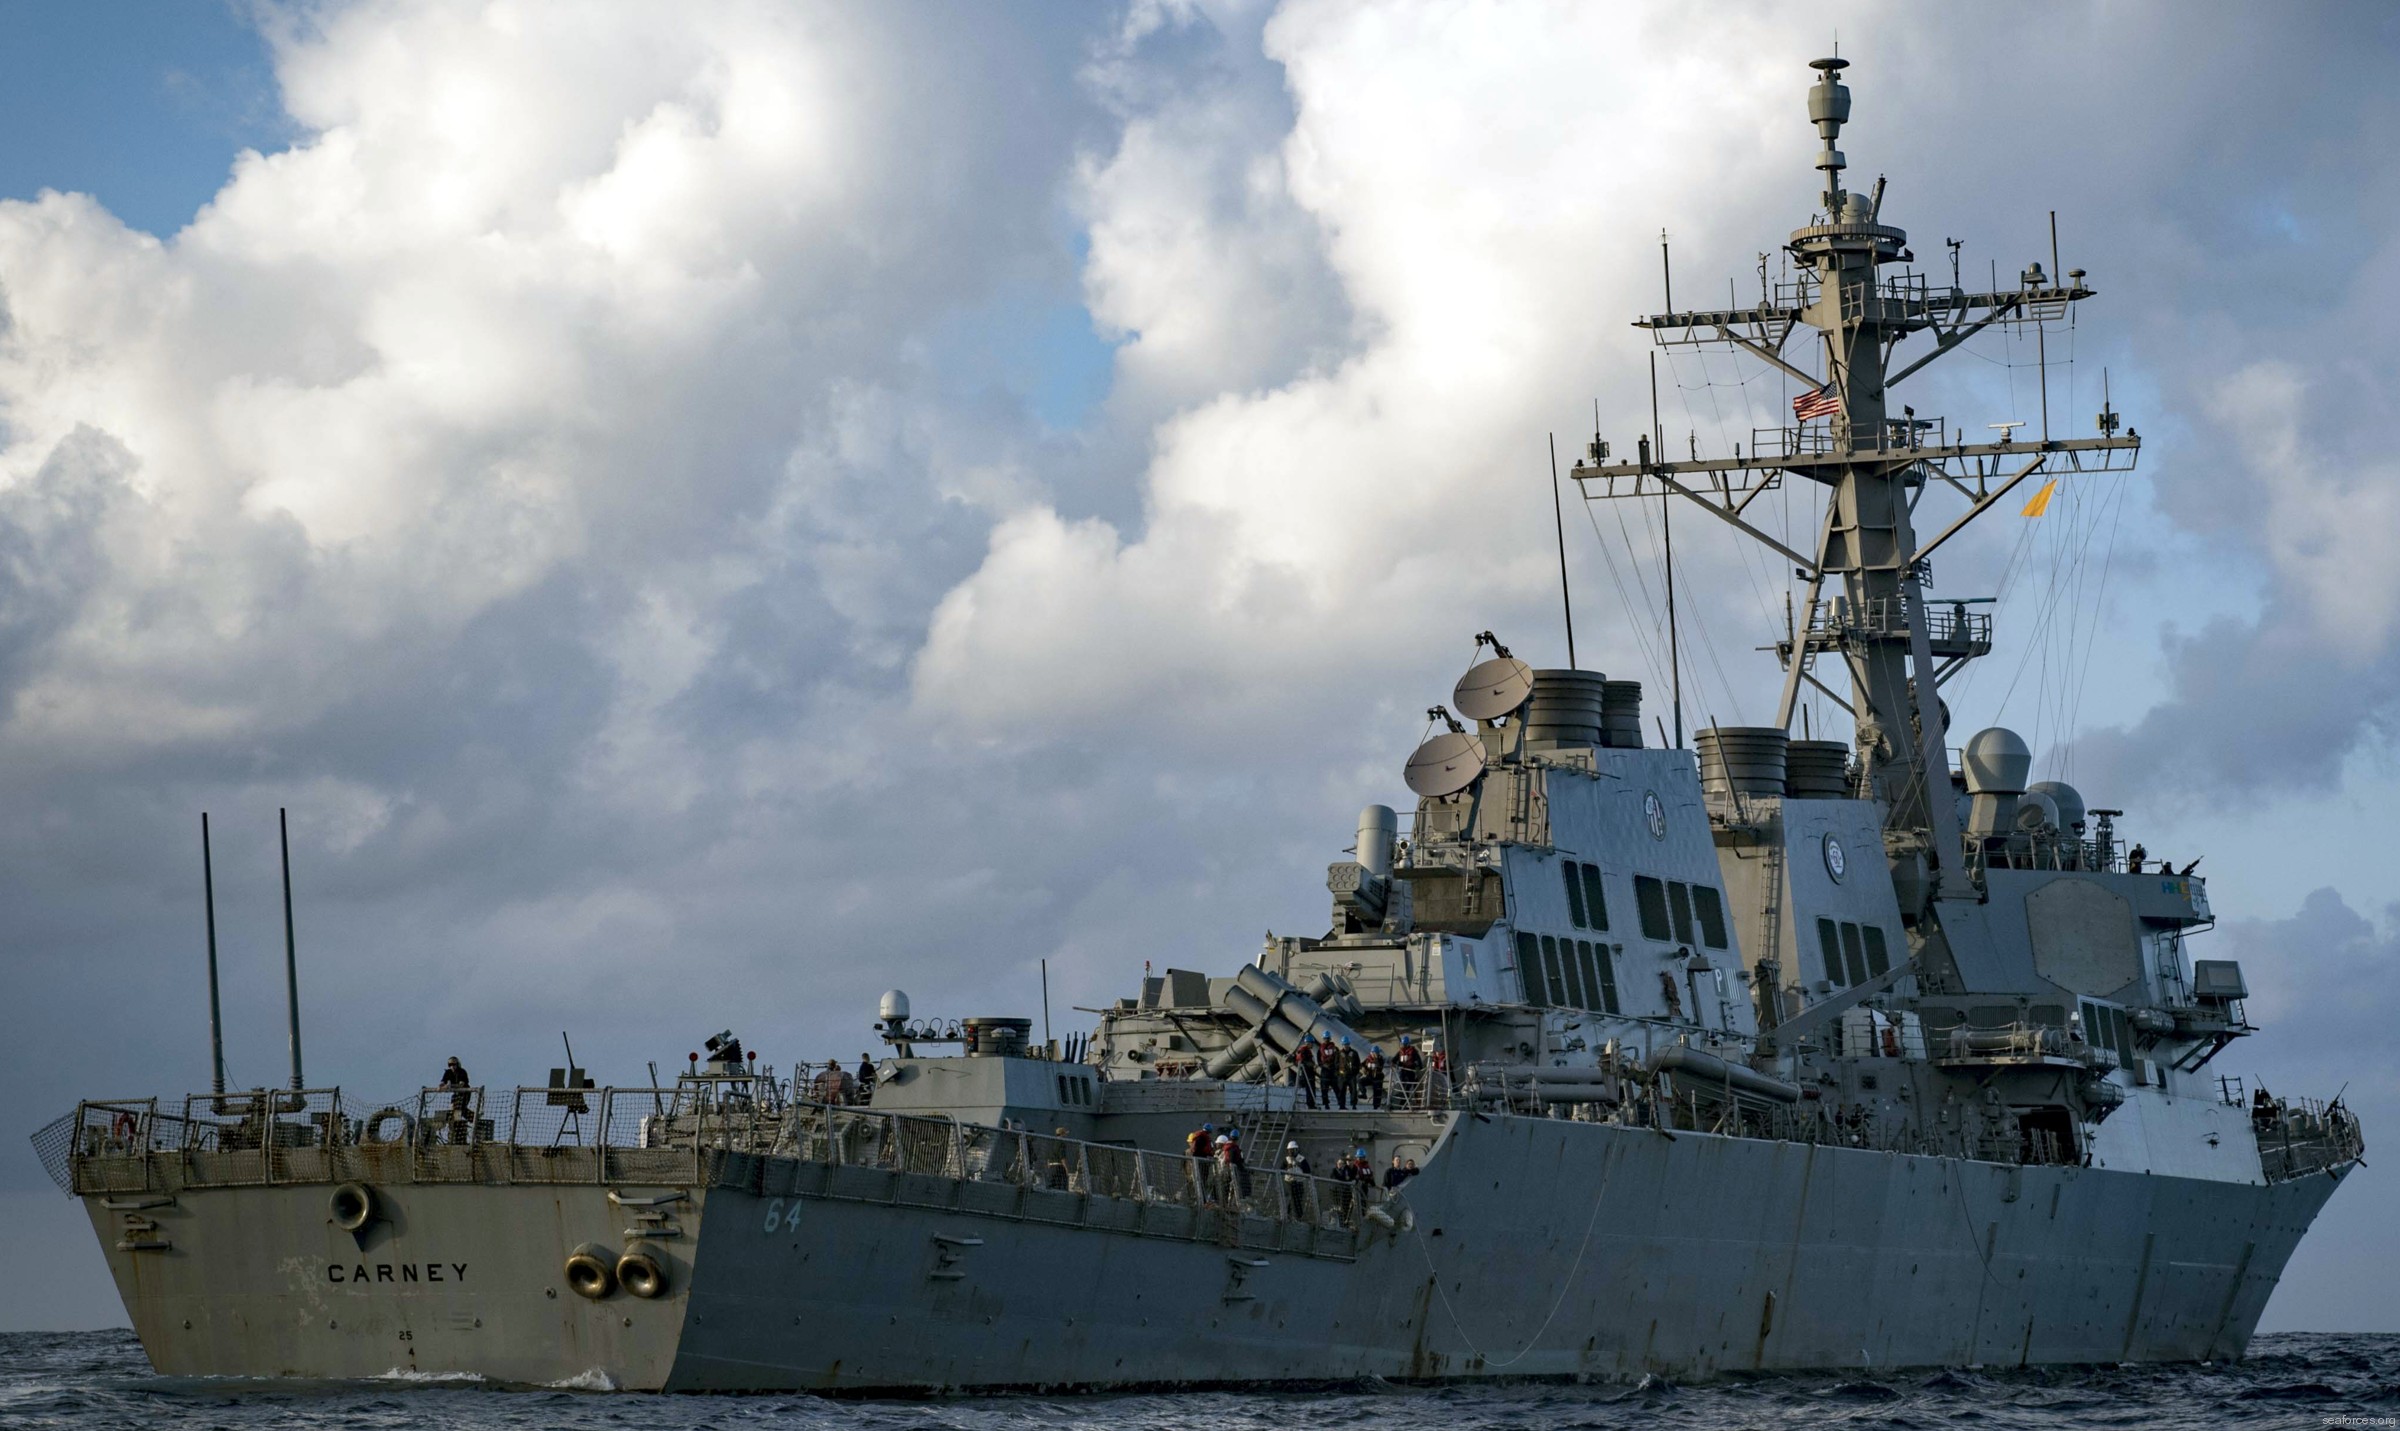 ddg-64 uss carney guided missile destroyer arleigh burke class 118